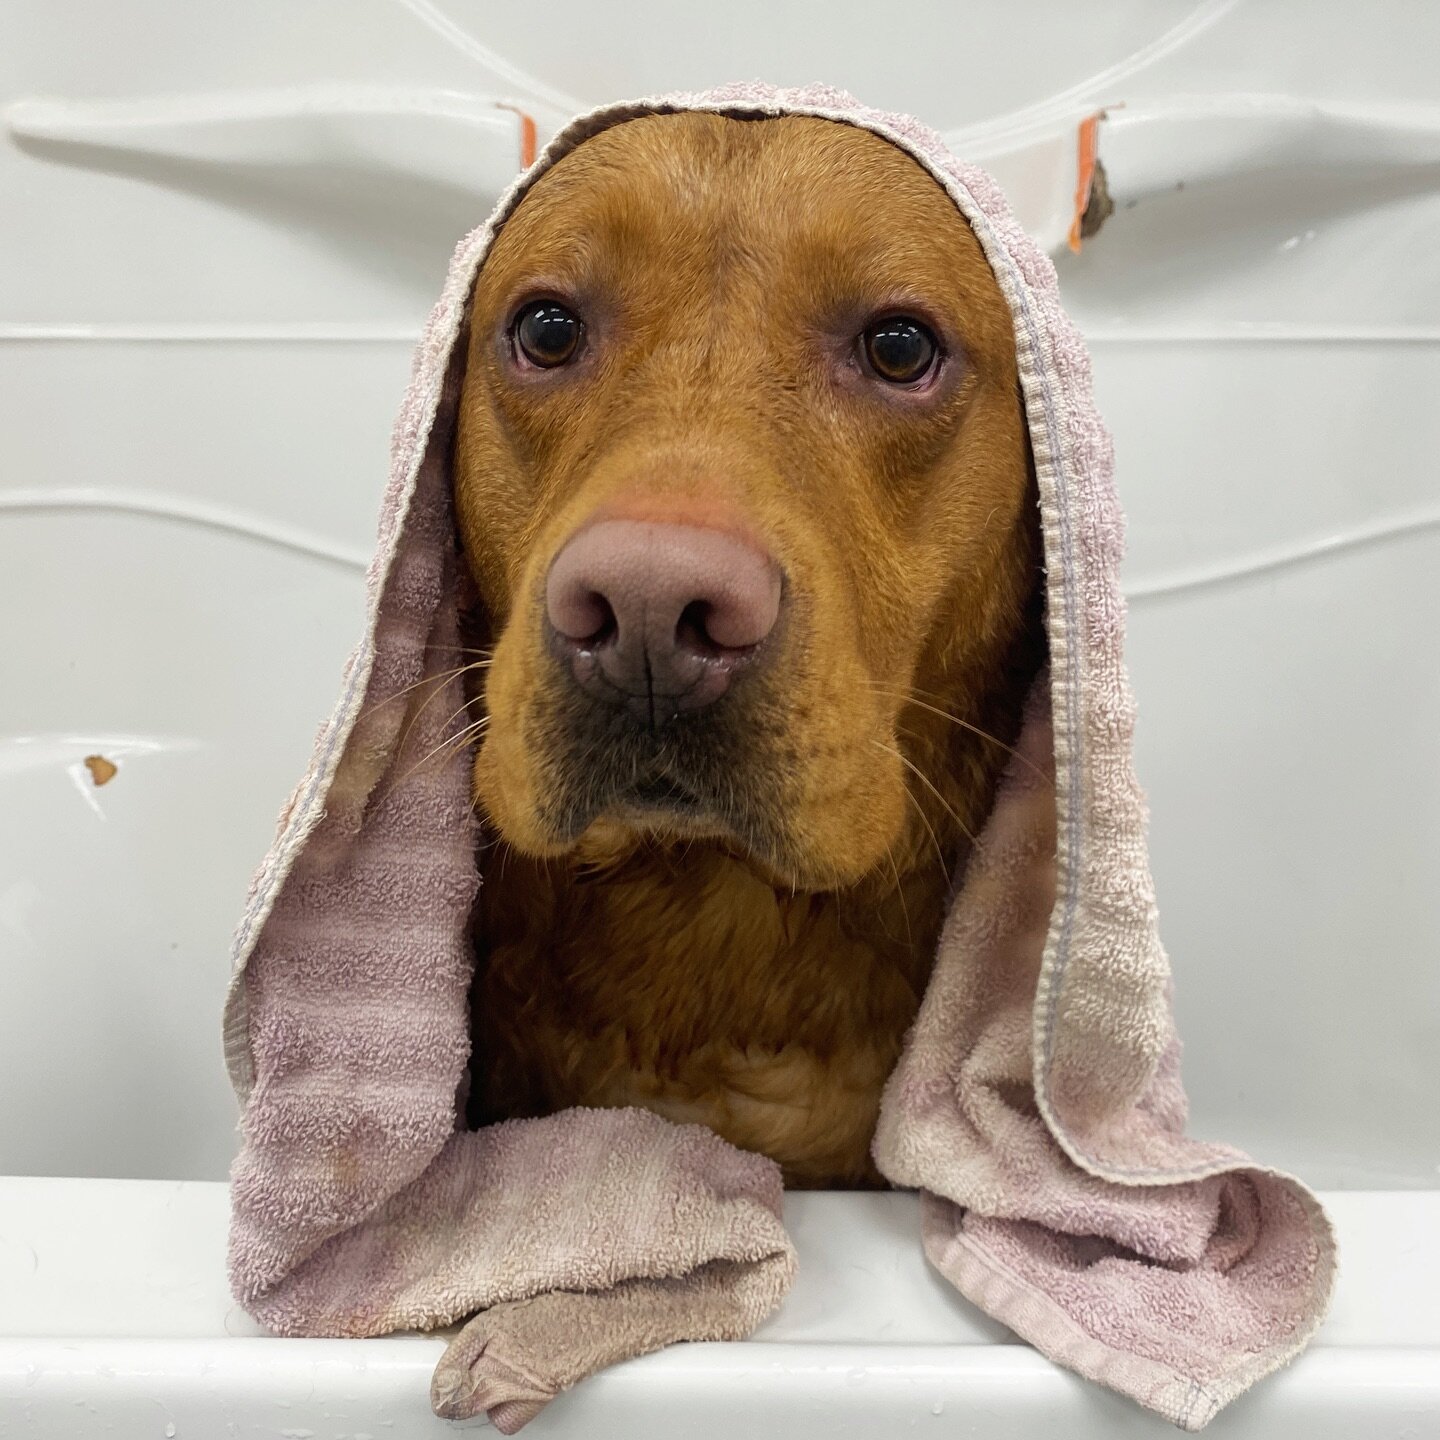 Stuck at home with a stinky dog? We have some bath and grooming appointments still available today! Get your pet smelling extra fresh and clean by calling us at 218-327-6079 🐶🫧🐱